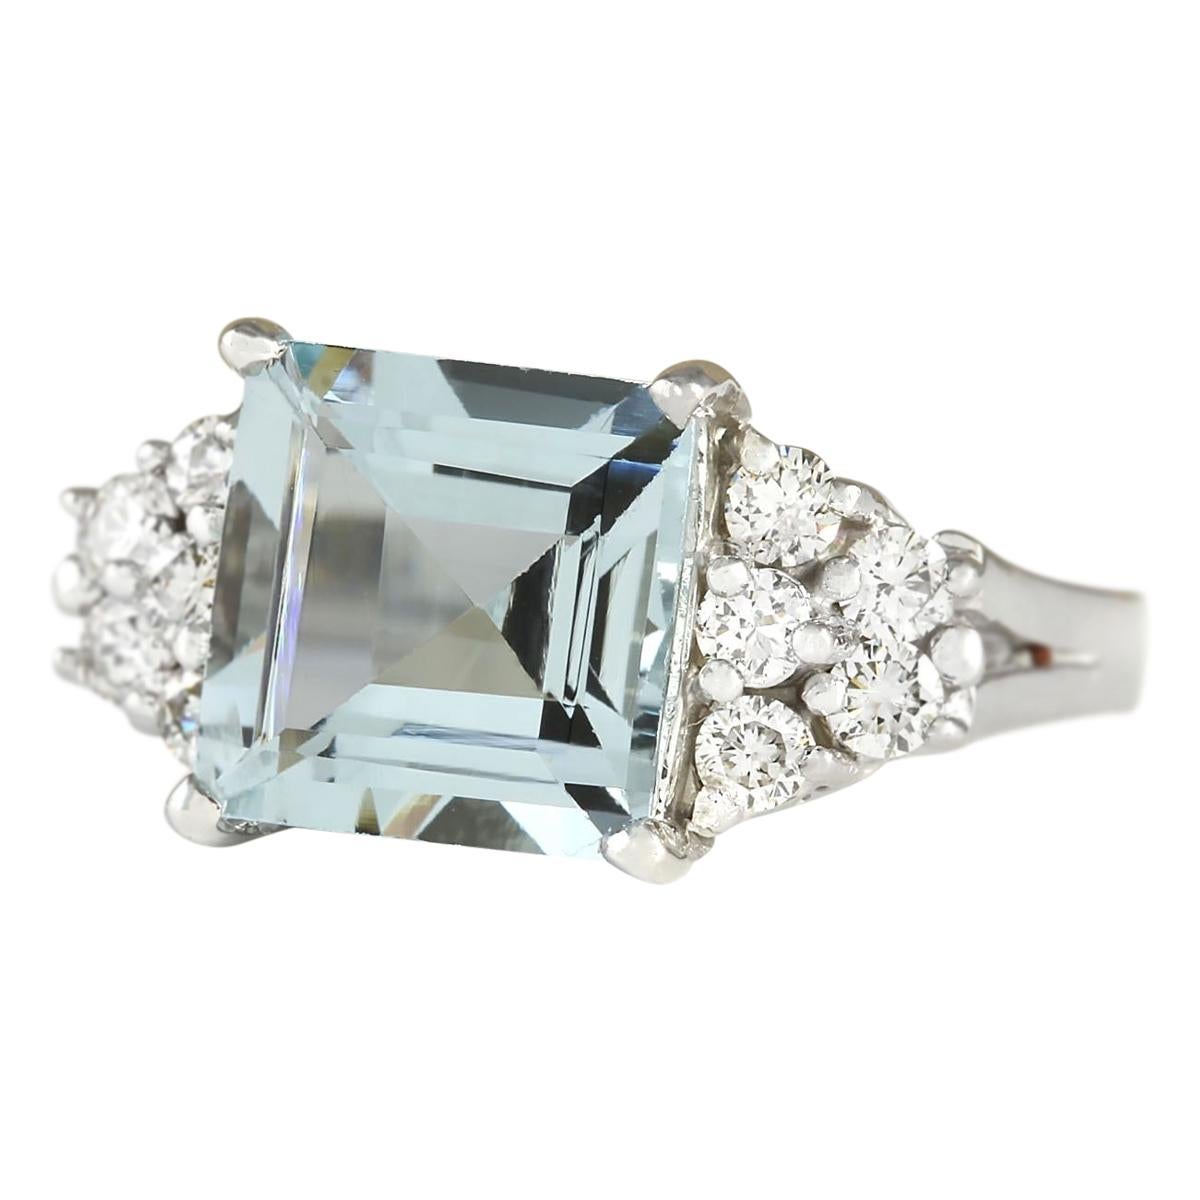 Stamped: 14K White Gold
Total Ring Weight: 5.0 Grams
Total Natural Aquamarine Weight is 3.00 Carat (Measures: 9.00x9.00 mm)
Color: Blue
Total Natural Diamond Weight is 0.40 Carat
Color: F-G, Clarity: VS2-SI1
Face Measures: 9.00x18.45 mm
Sku: